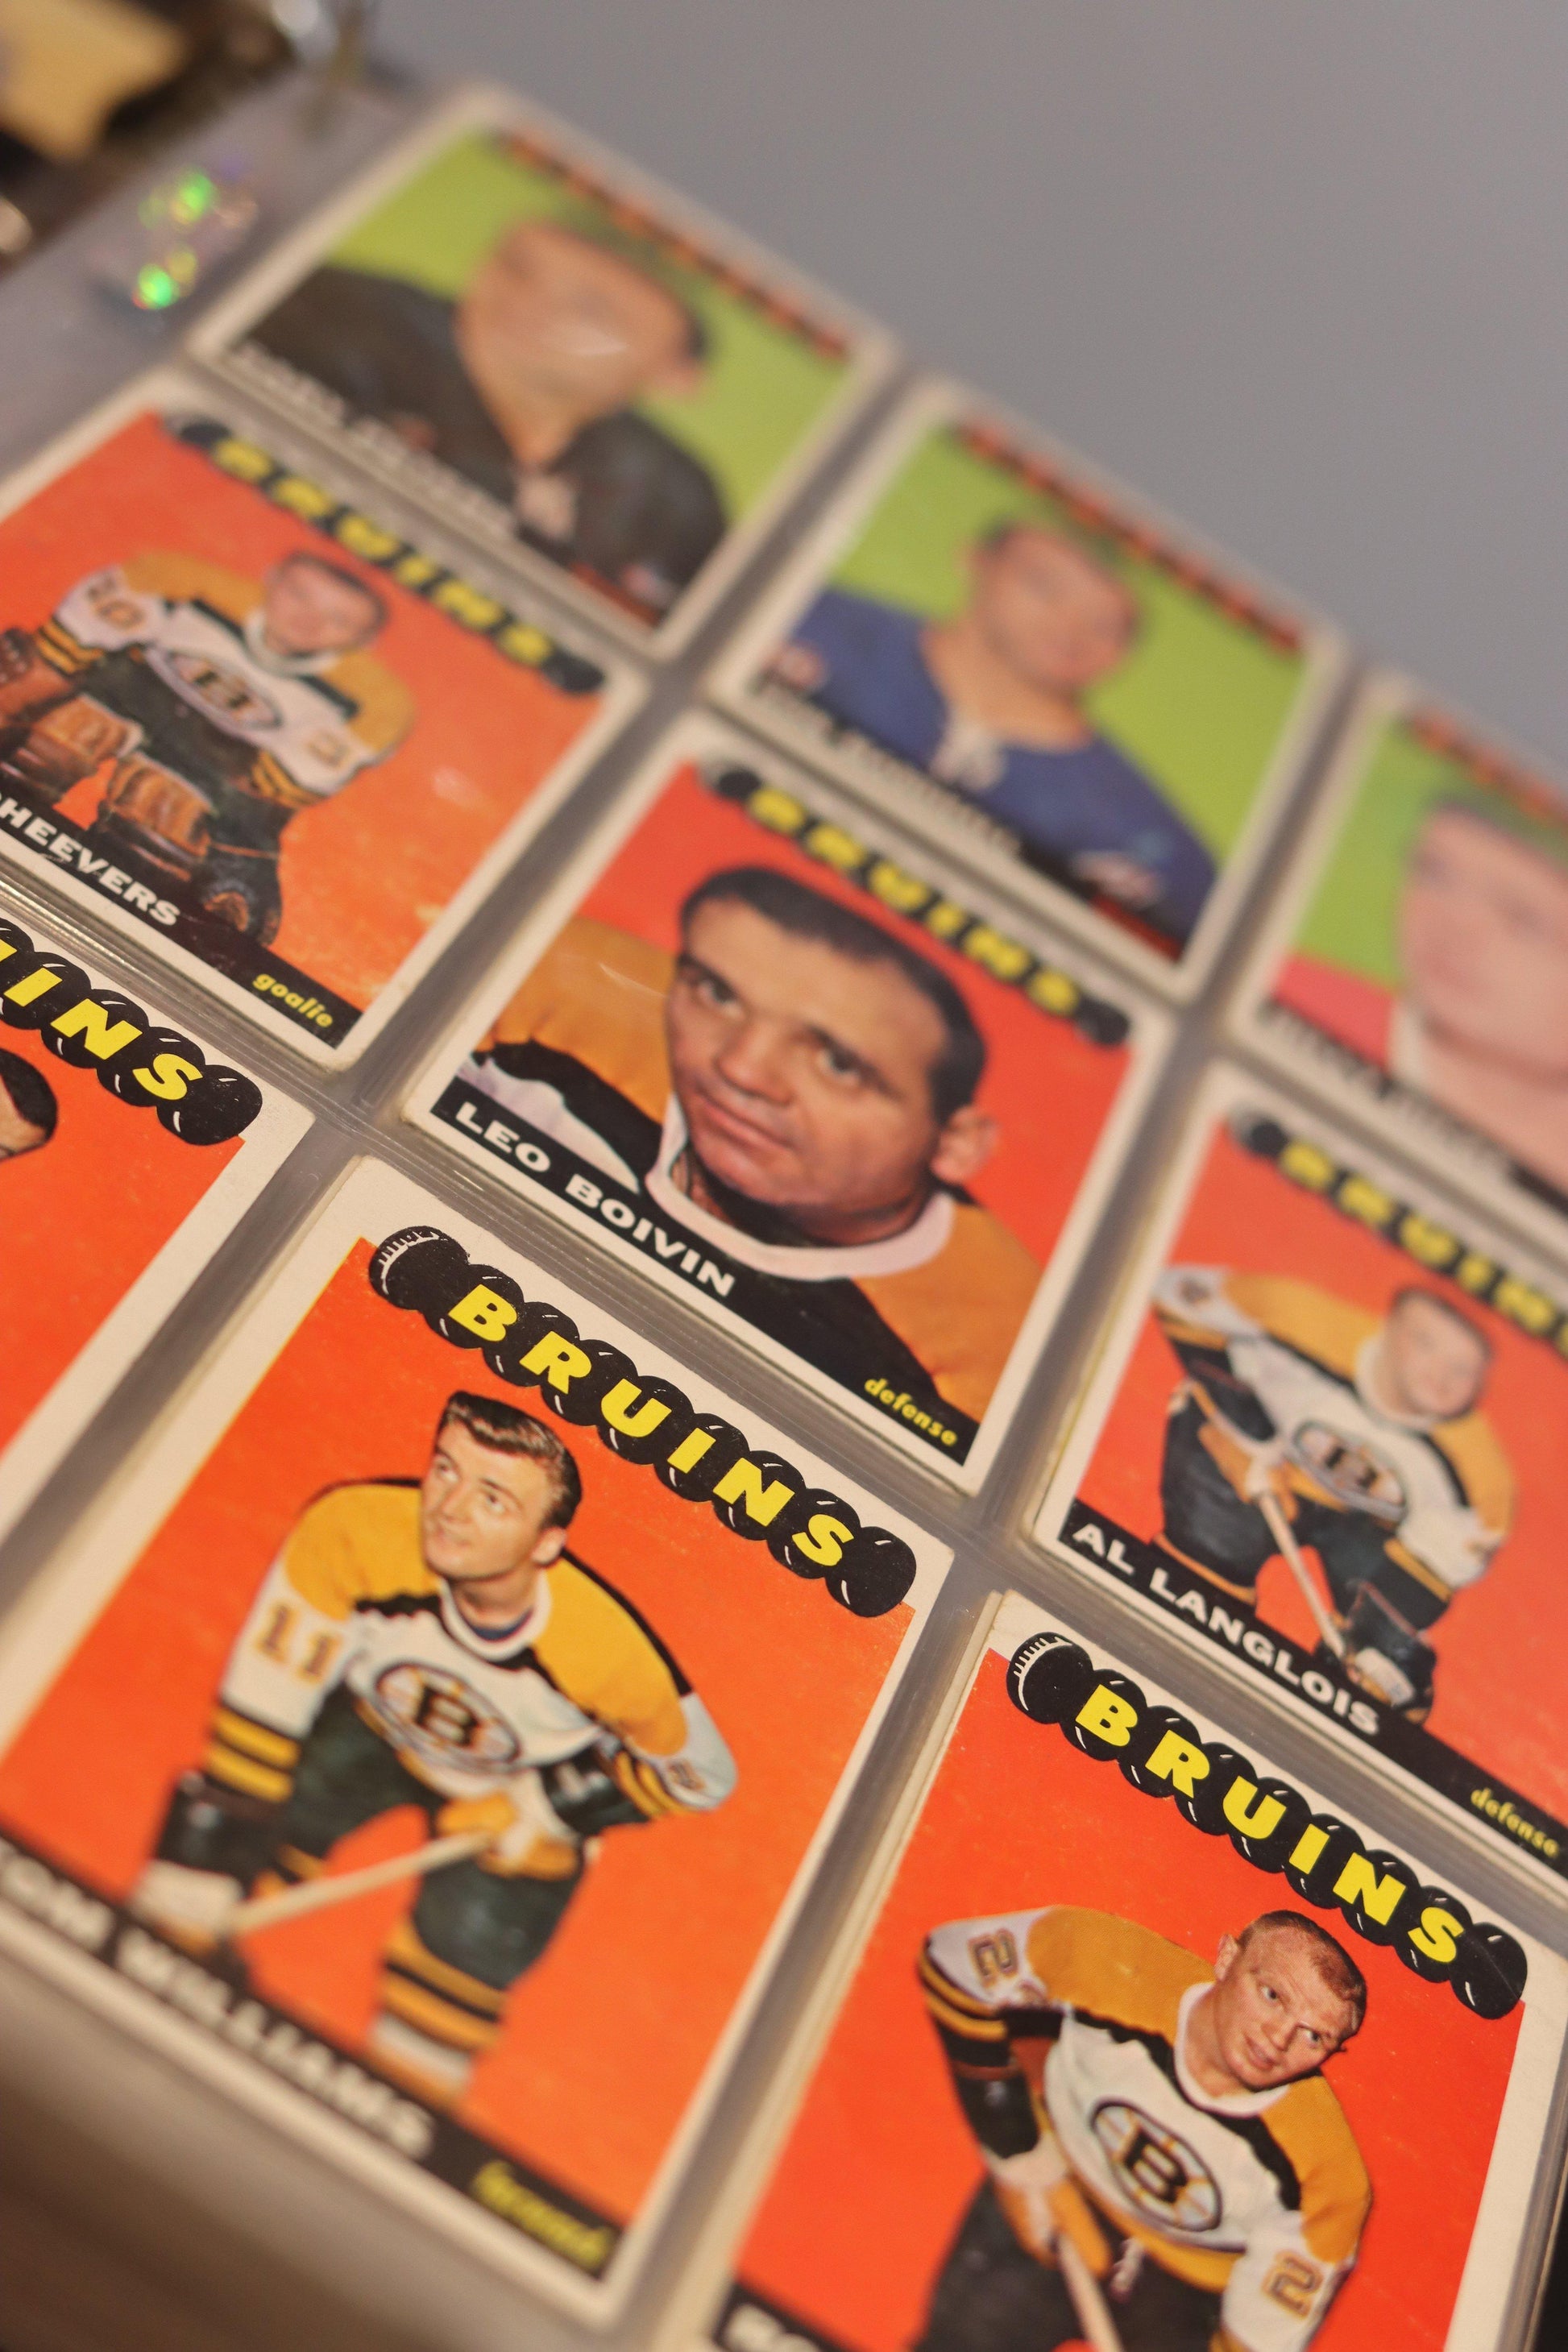 1965/66 Topps Hockey Card Complete Set - FLIP Collectibles Shop